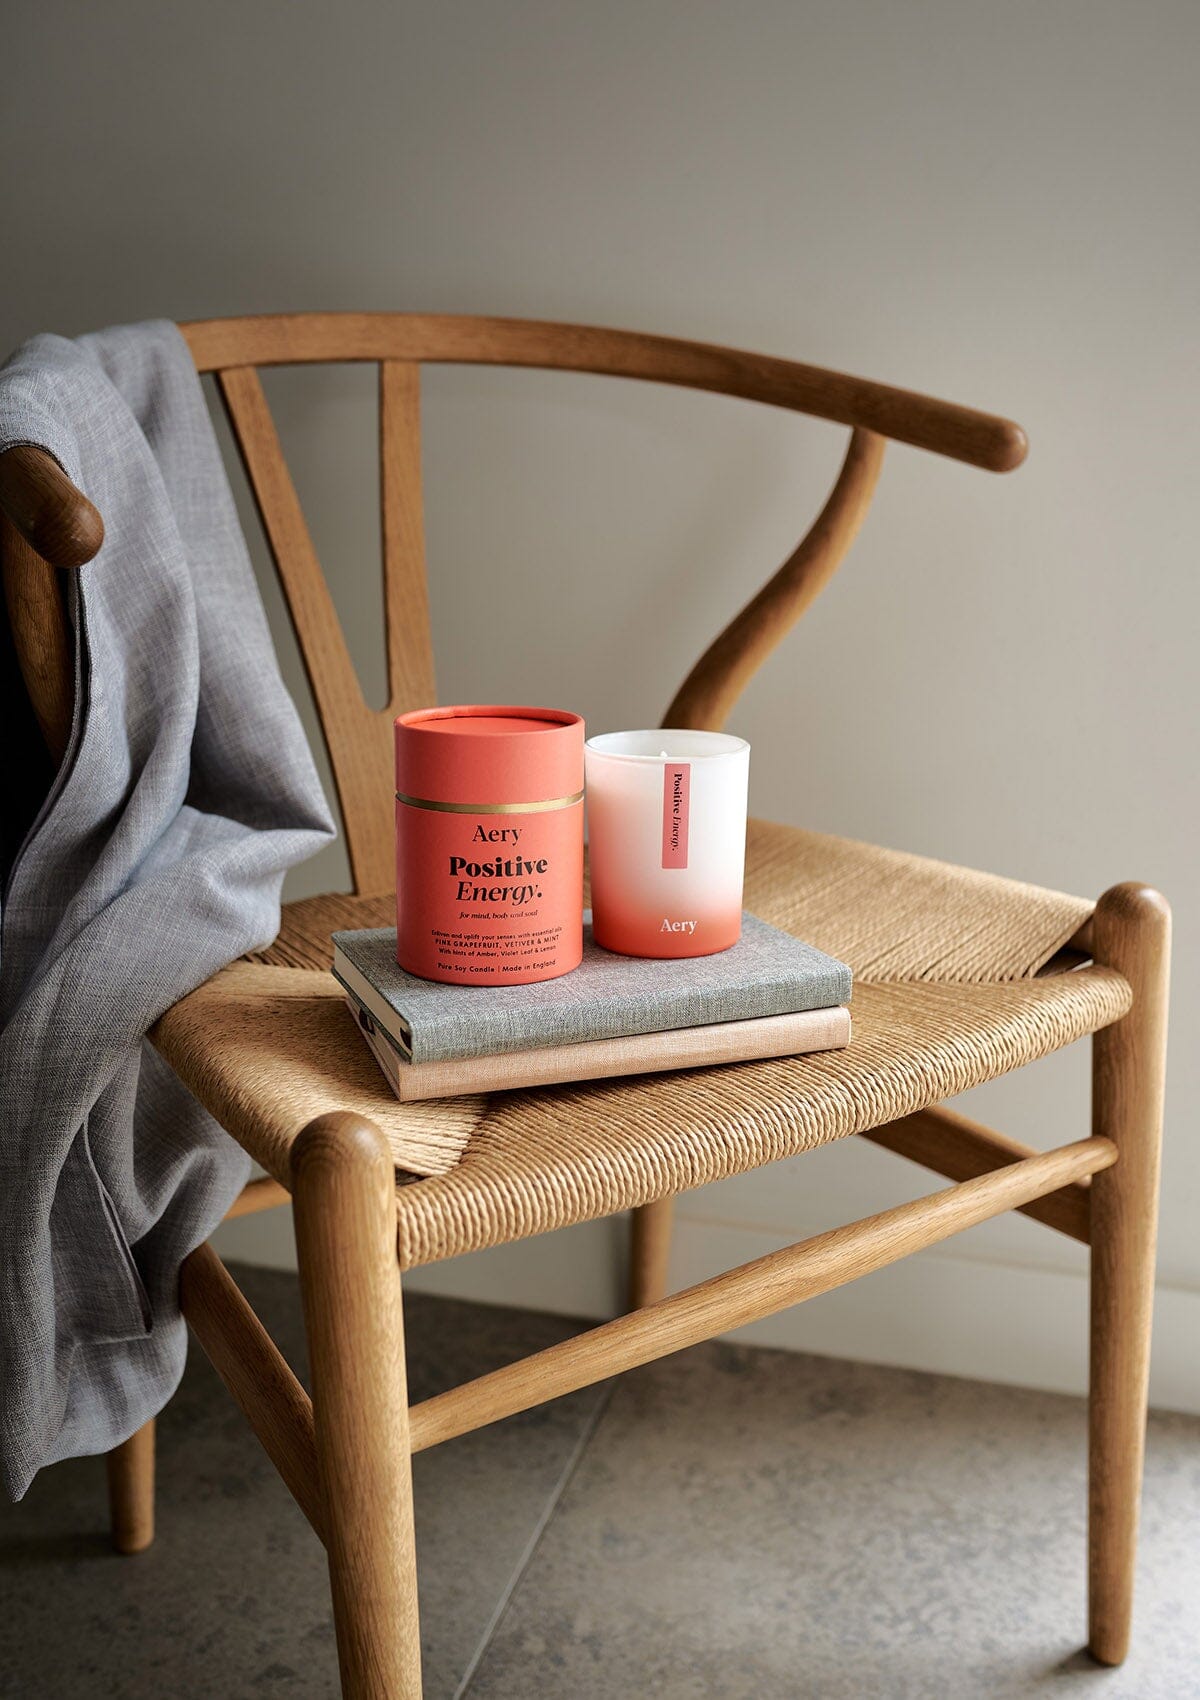 Orange Positive Energy candle displayed next to Product packaging by Aery placed on books and wicker chair 